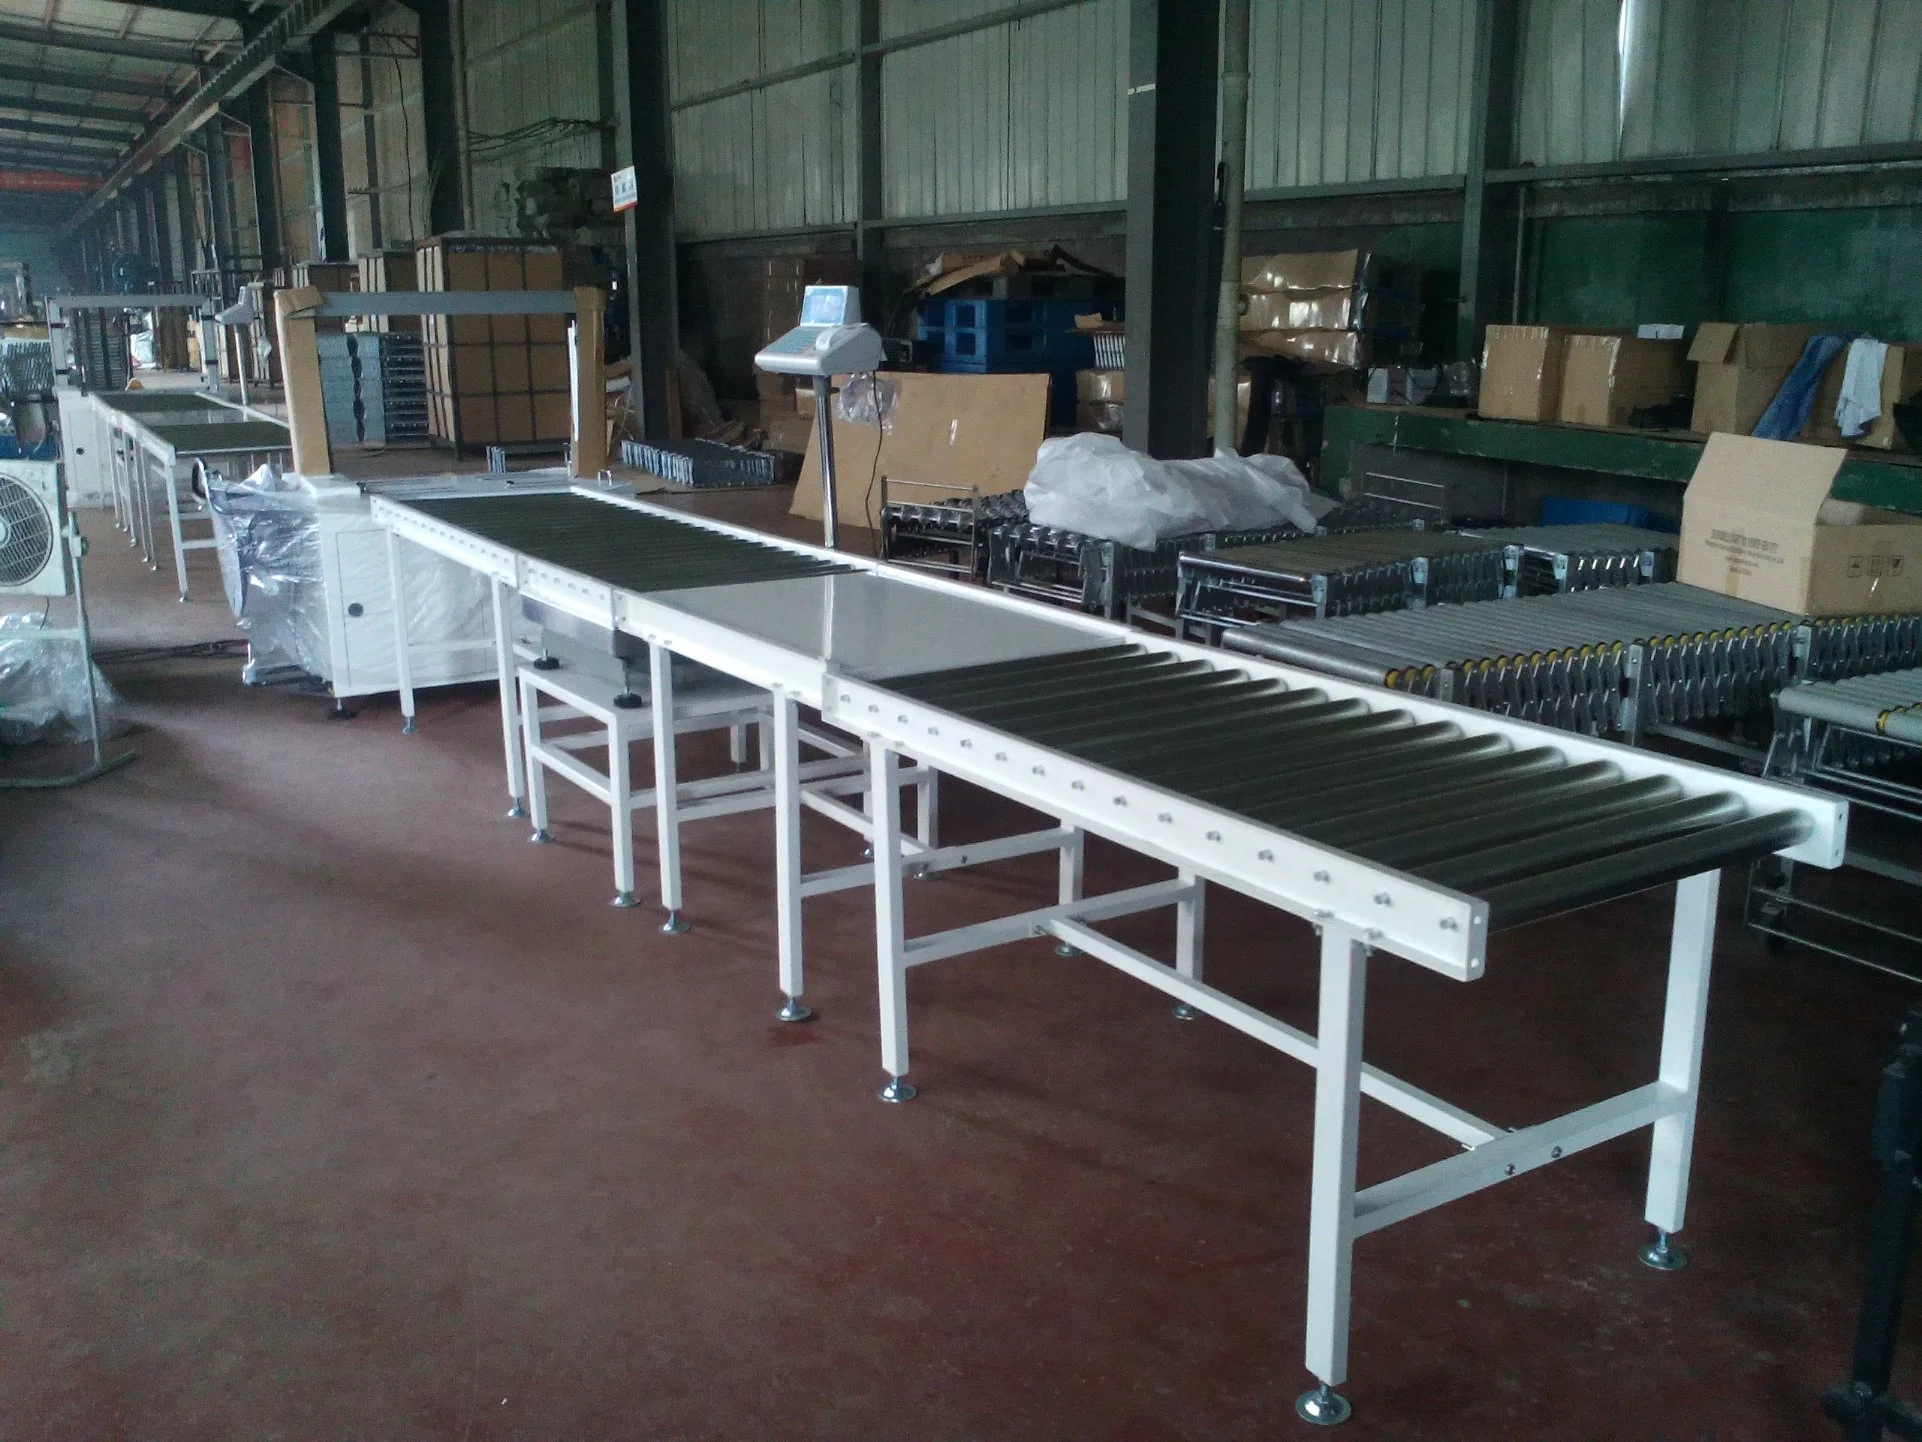 Semi-Automatic Packing Line Roller Conveyor System with Weighing Unit